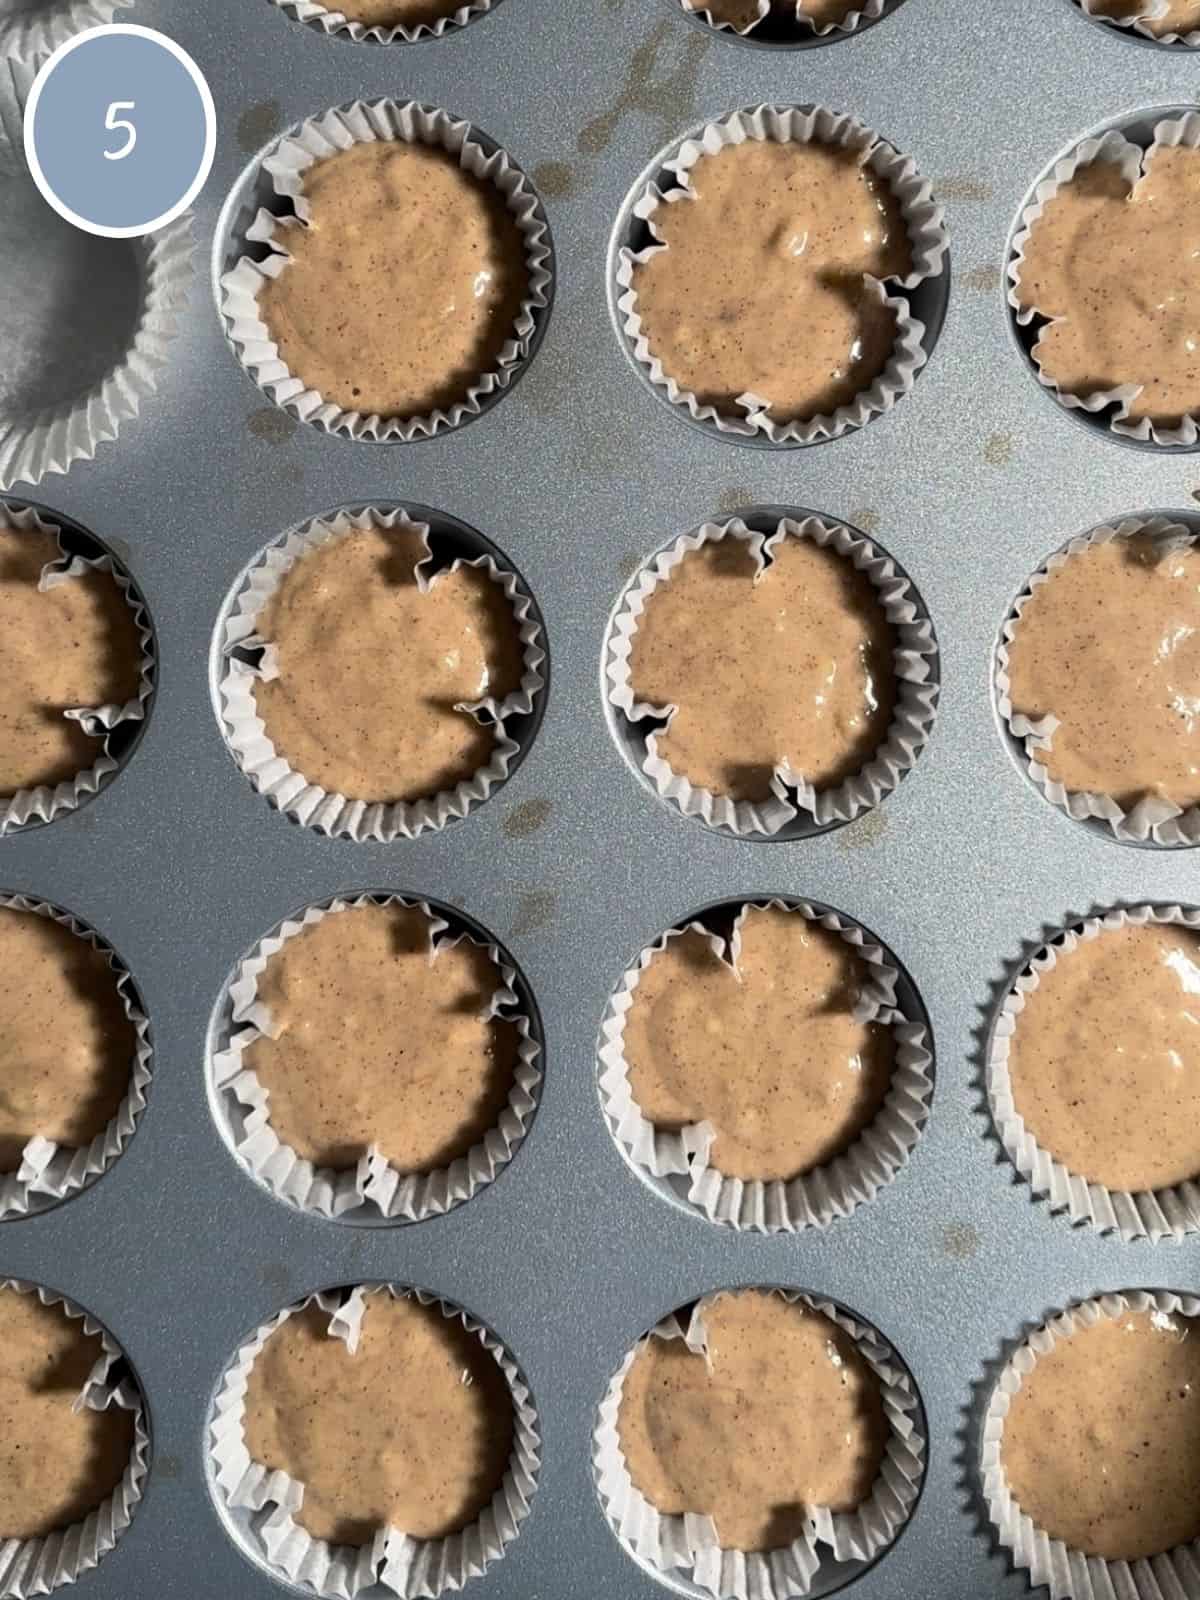 Muffin batter in the muffin tin cups.